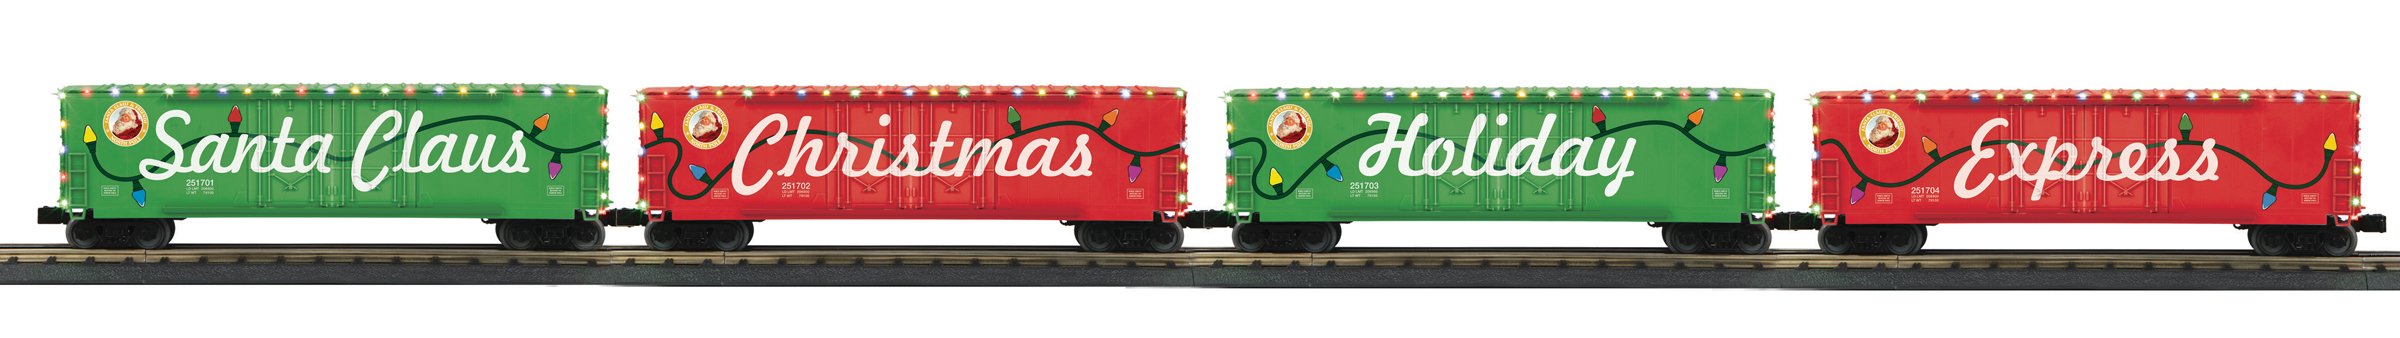 RARE MTH 30-74490 M&m's 2008 Christmas Happy Holidays RAILKING Boxcar MIB for sale online